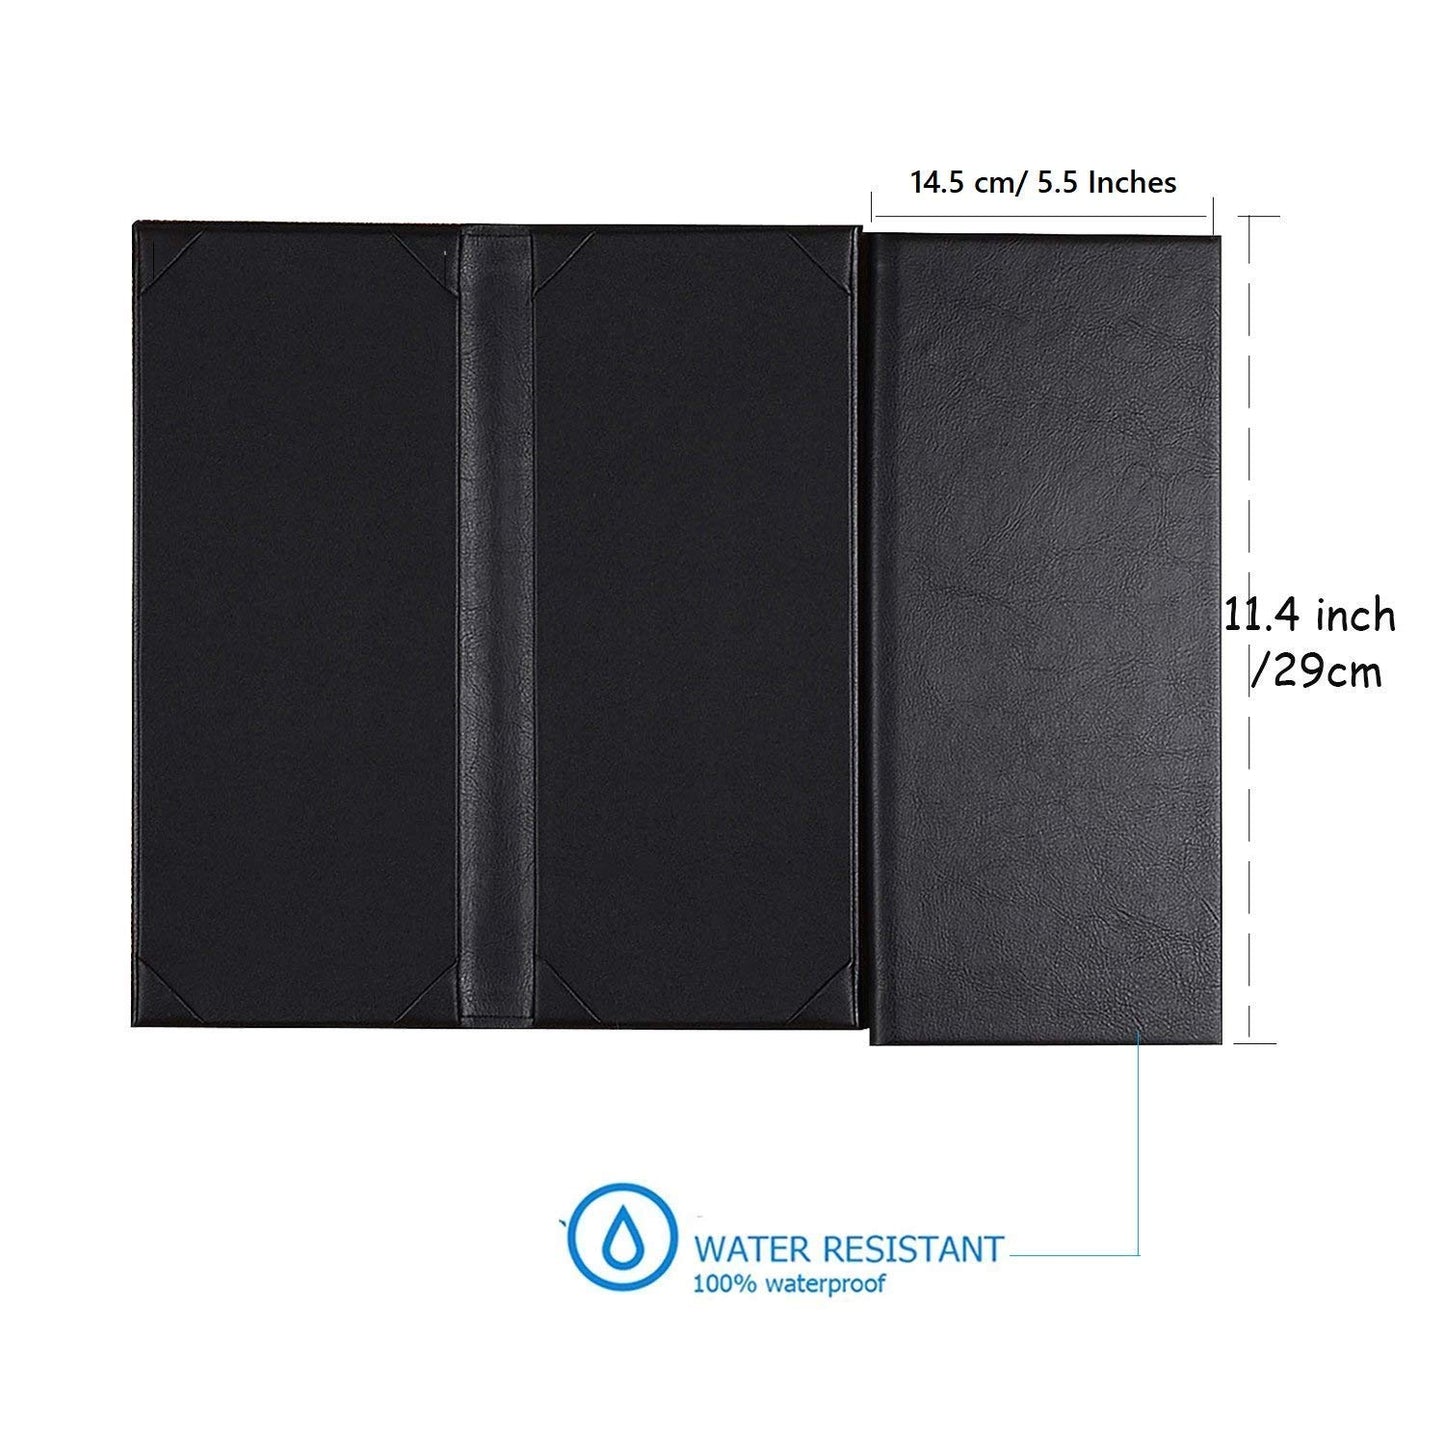 Rudra Exports Leather Book Style Double Fold Panel Menu Cover Folder, Binder Style Bar Cocktail Folder, Restaurant Menu Covers, Cocktail Menu Folder, Juice and Beverage Folder Black : 01 Pc.